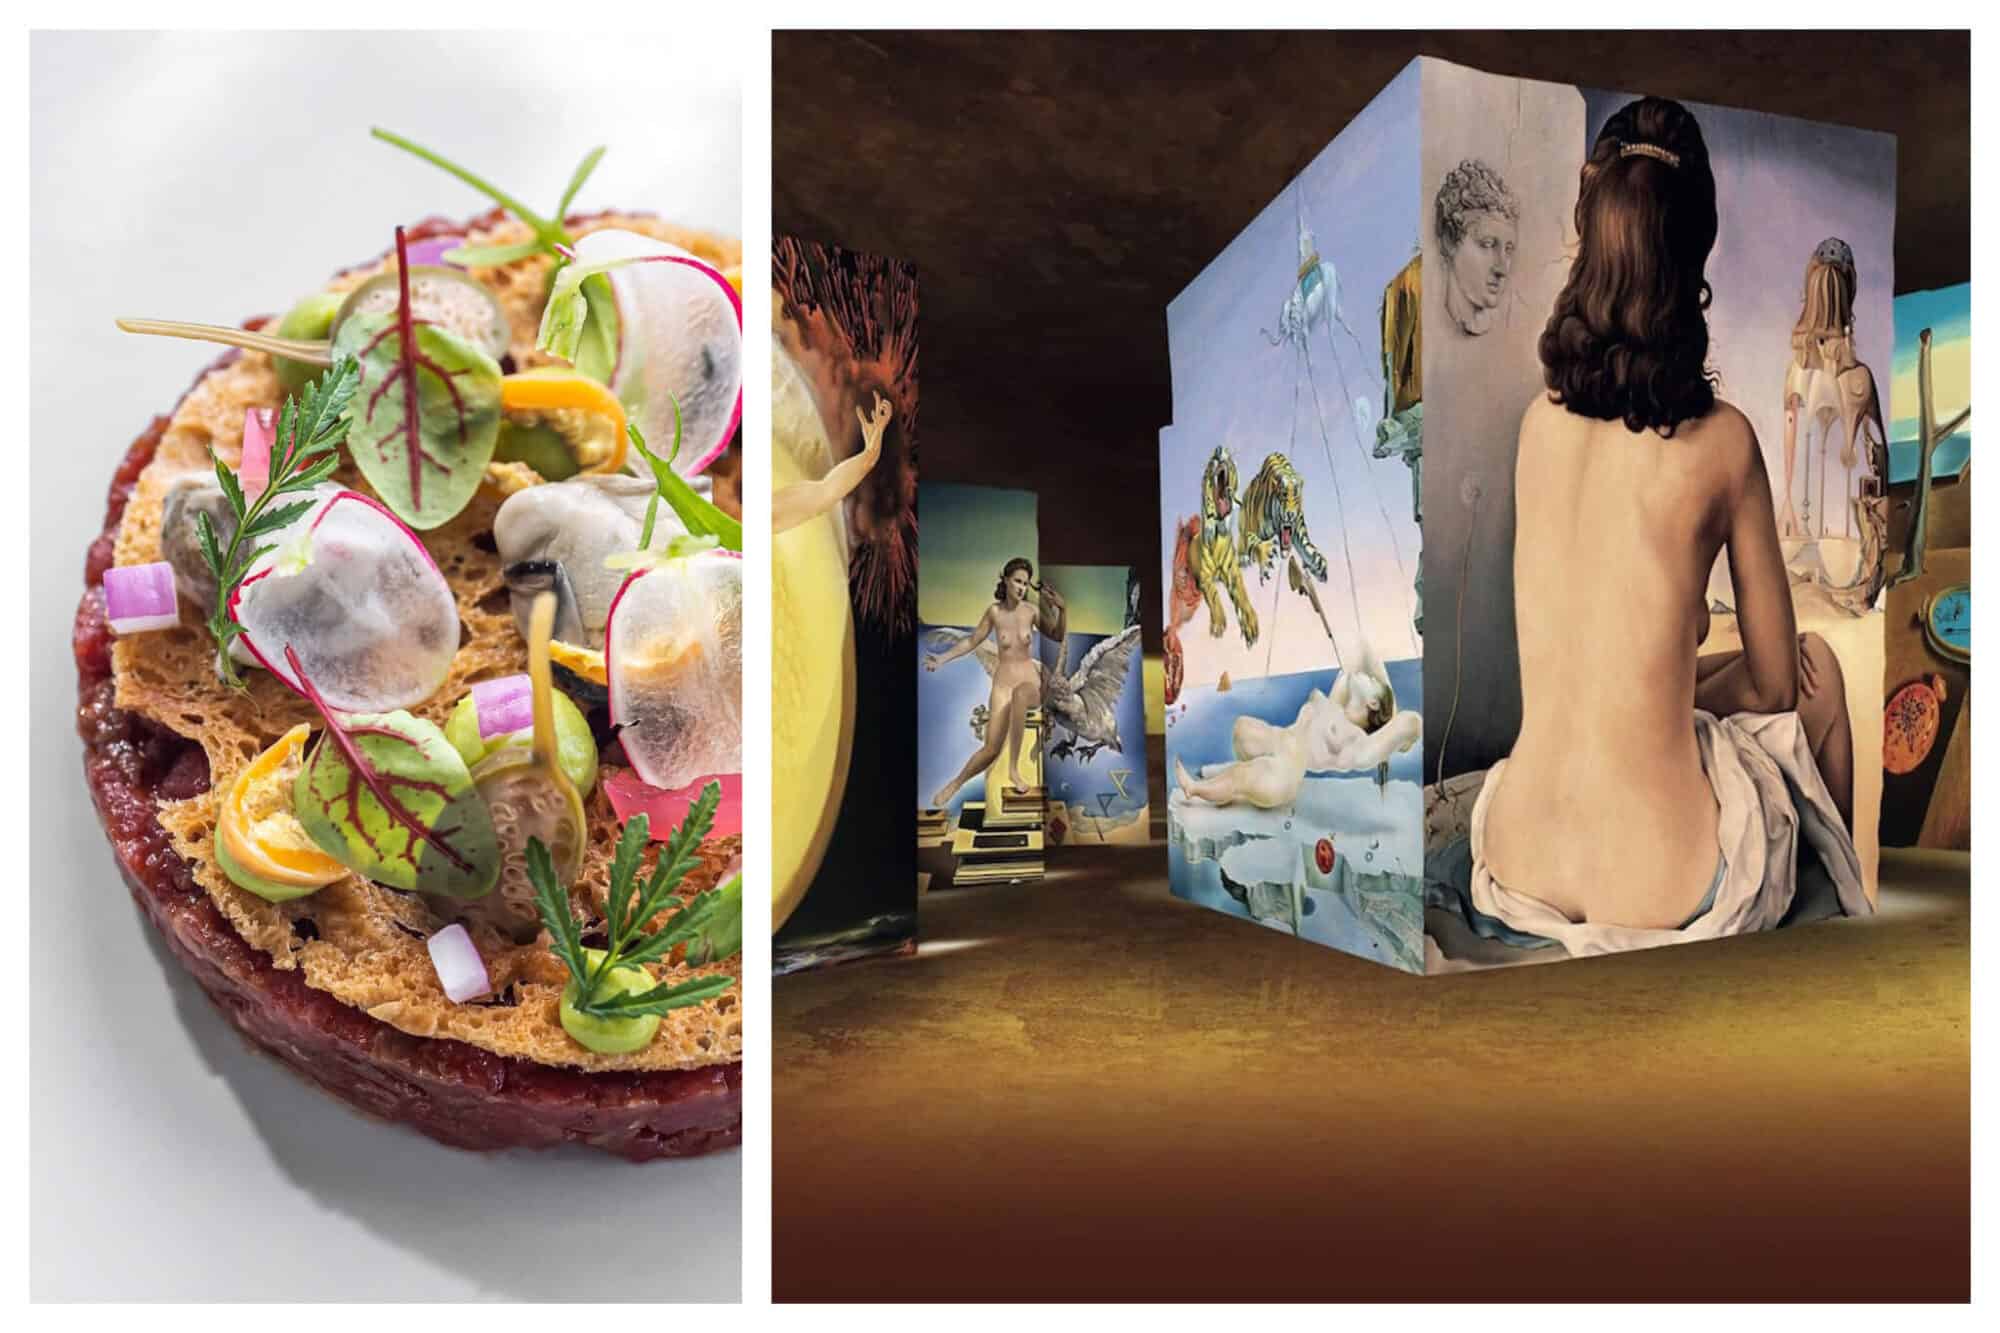 Left: A beautifully plated dish at the Micheling-starred L'Oustau de Baumanière, Right: Art is projected onto the walls of the Cerrières de Lumières art space in Arles.